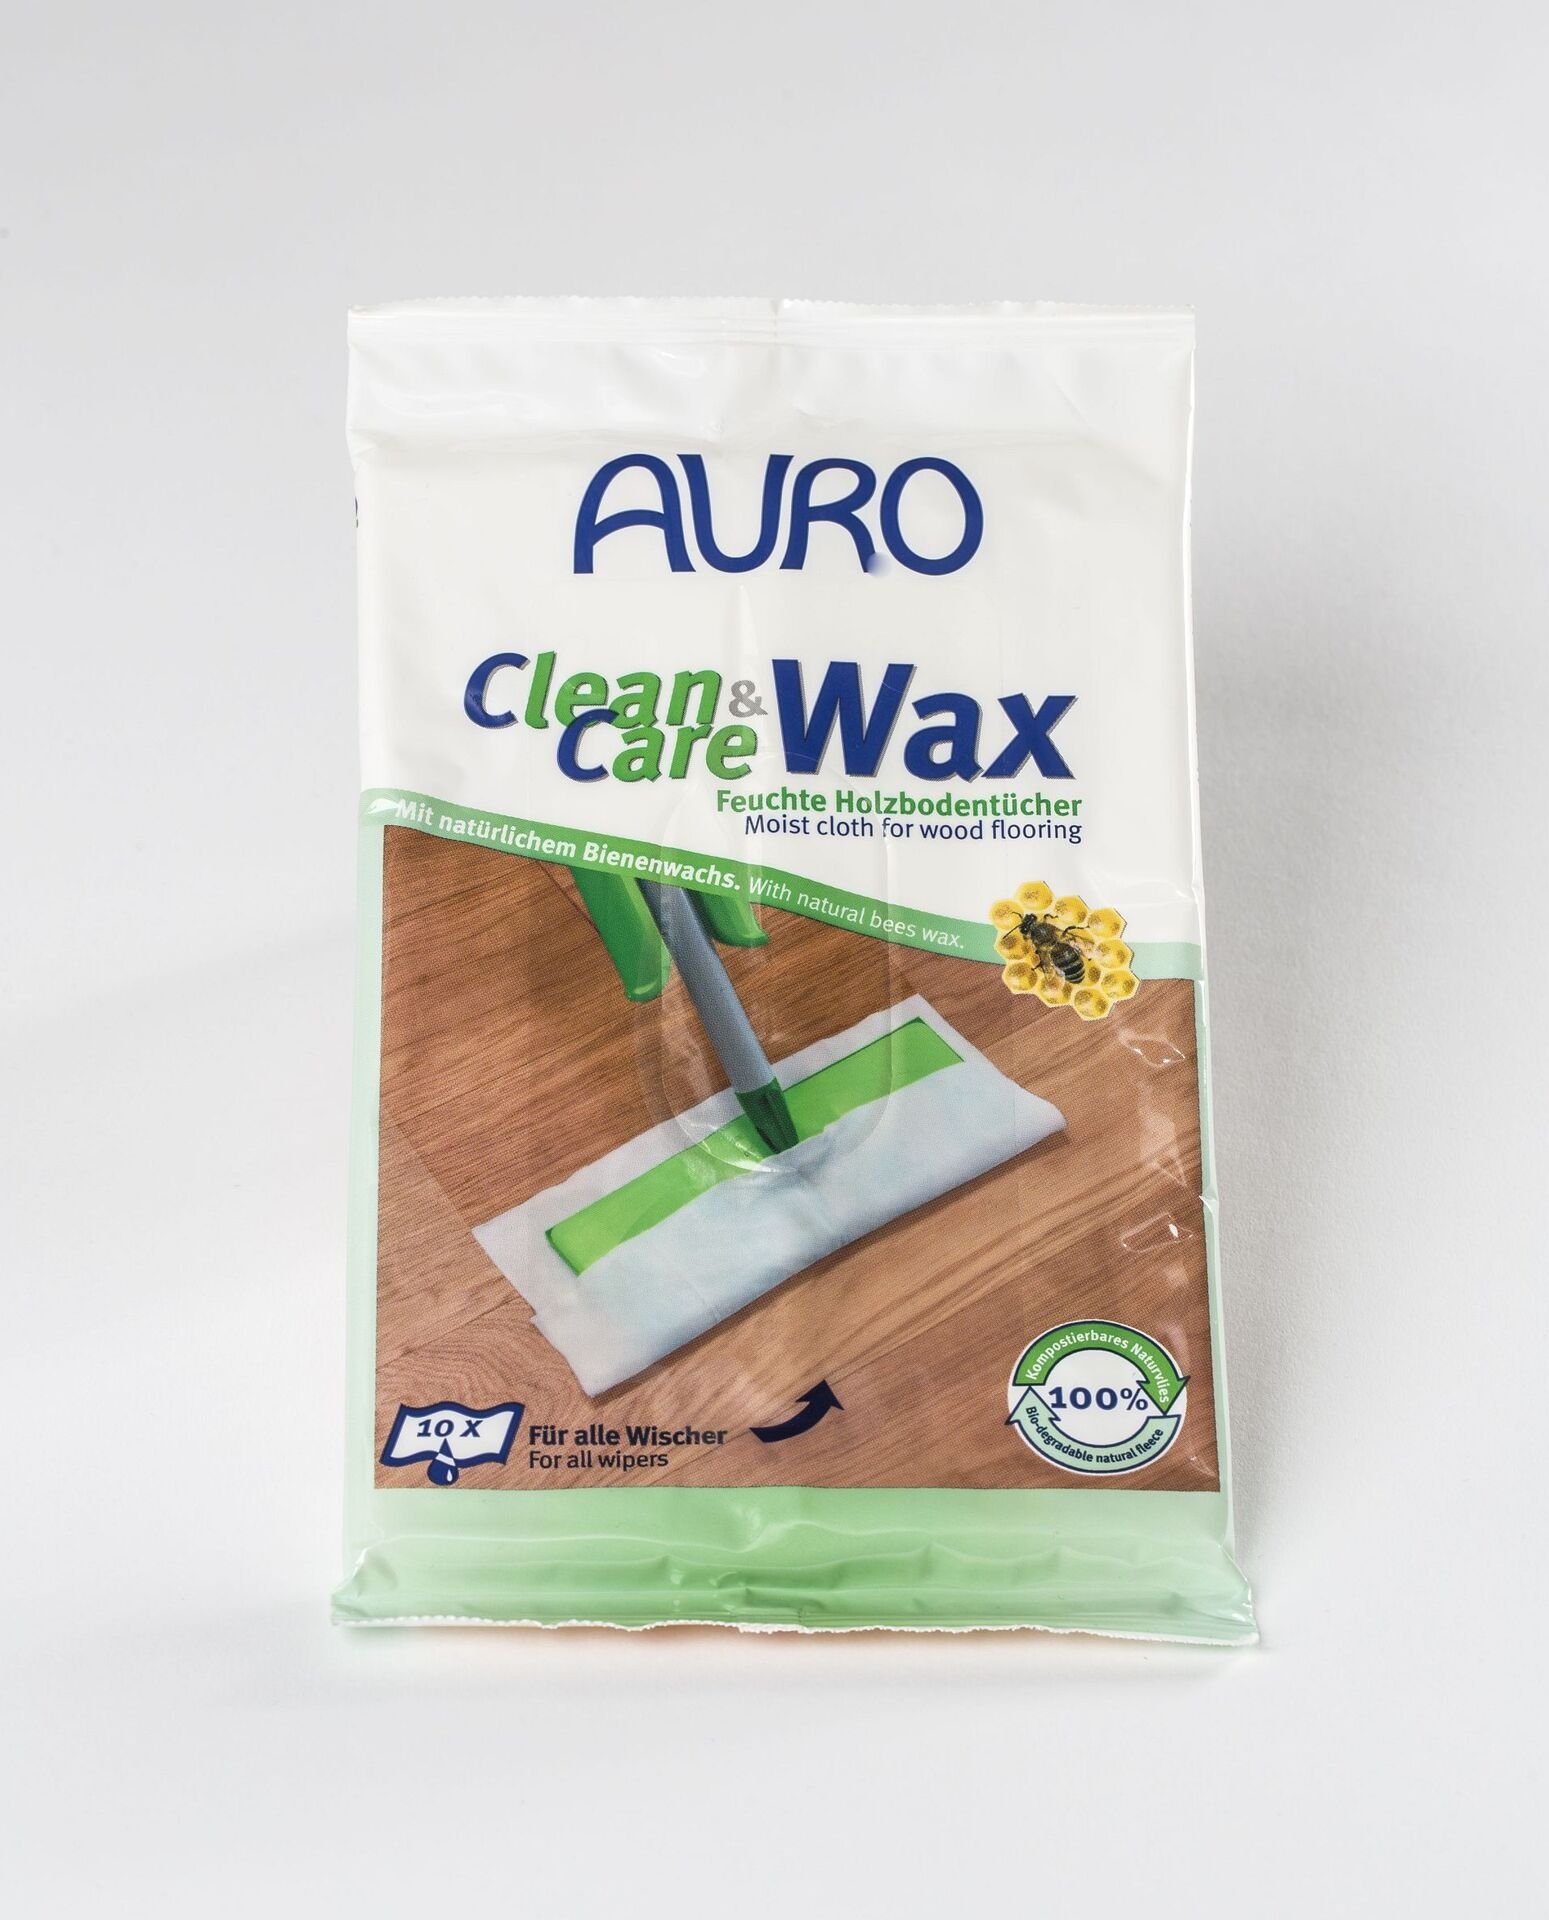 Clean & Care Wax - Feuchte Holzbodentücher